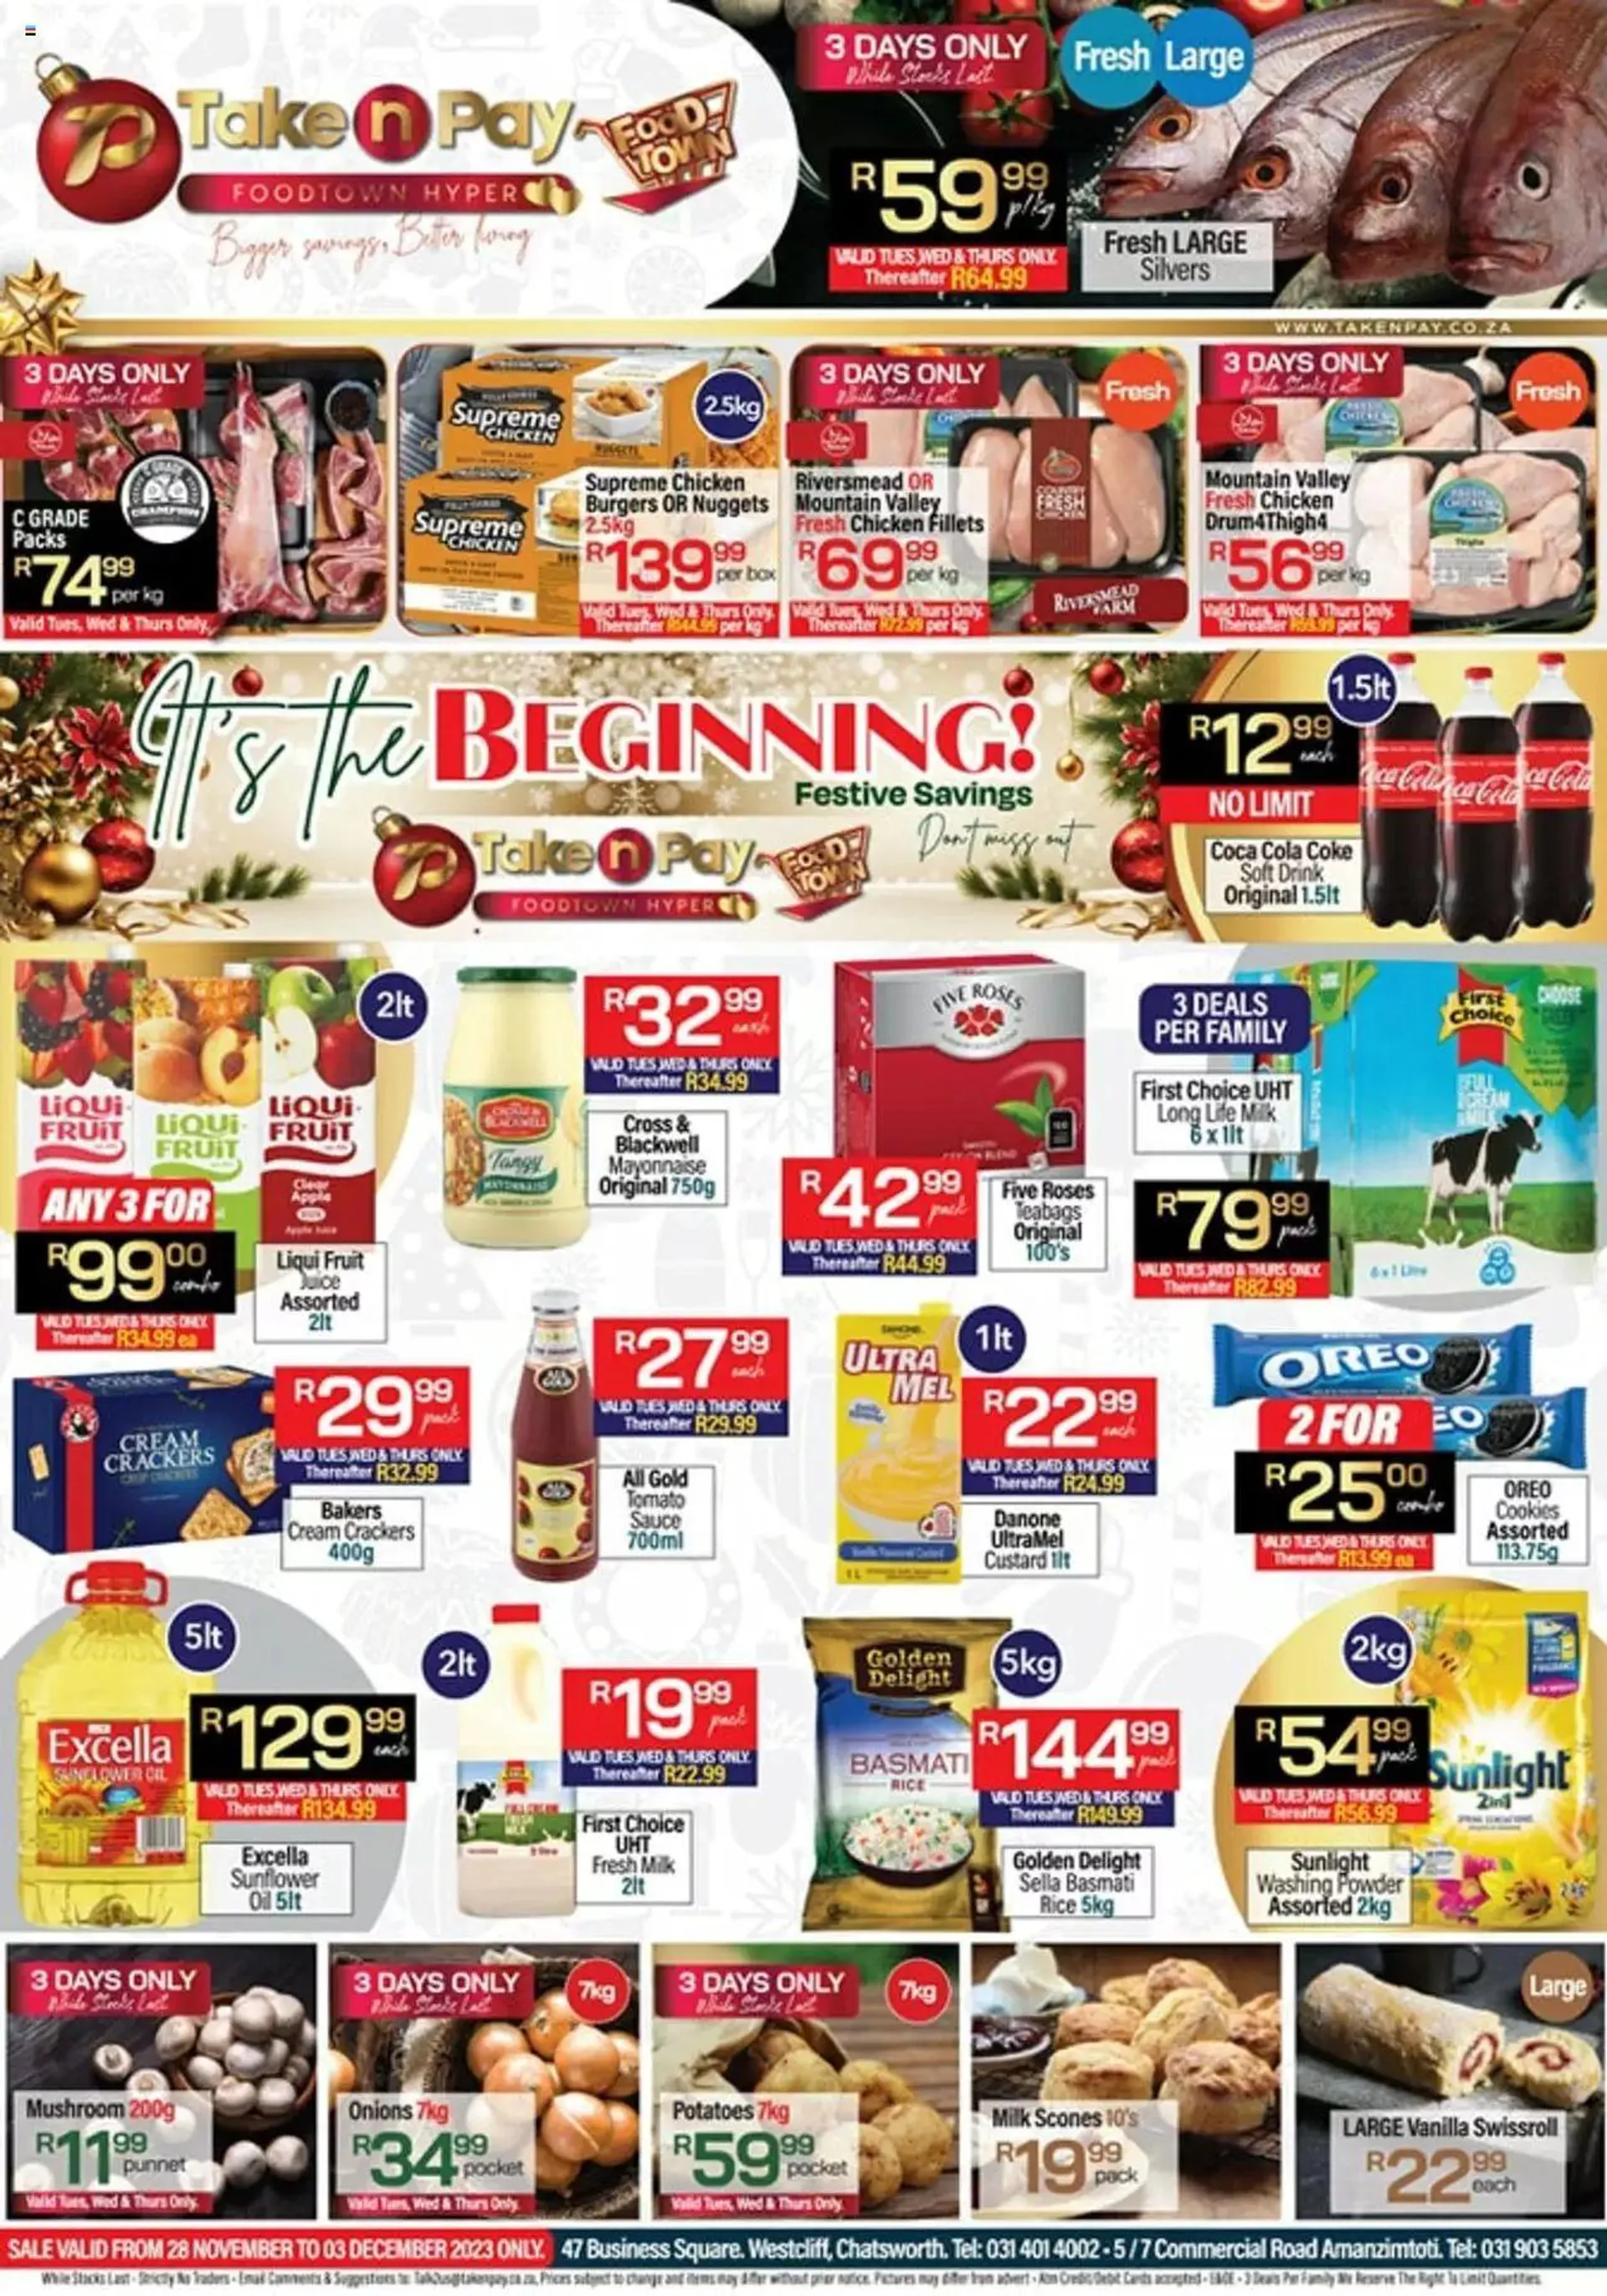 Take n Pay Specials